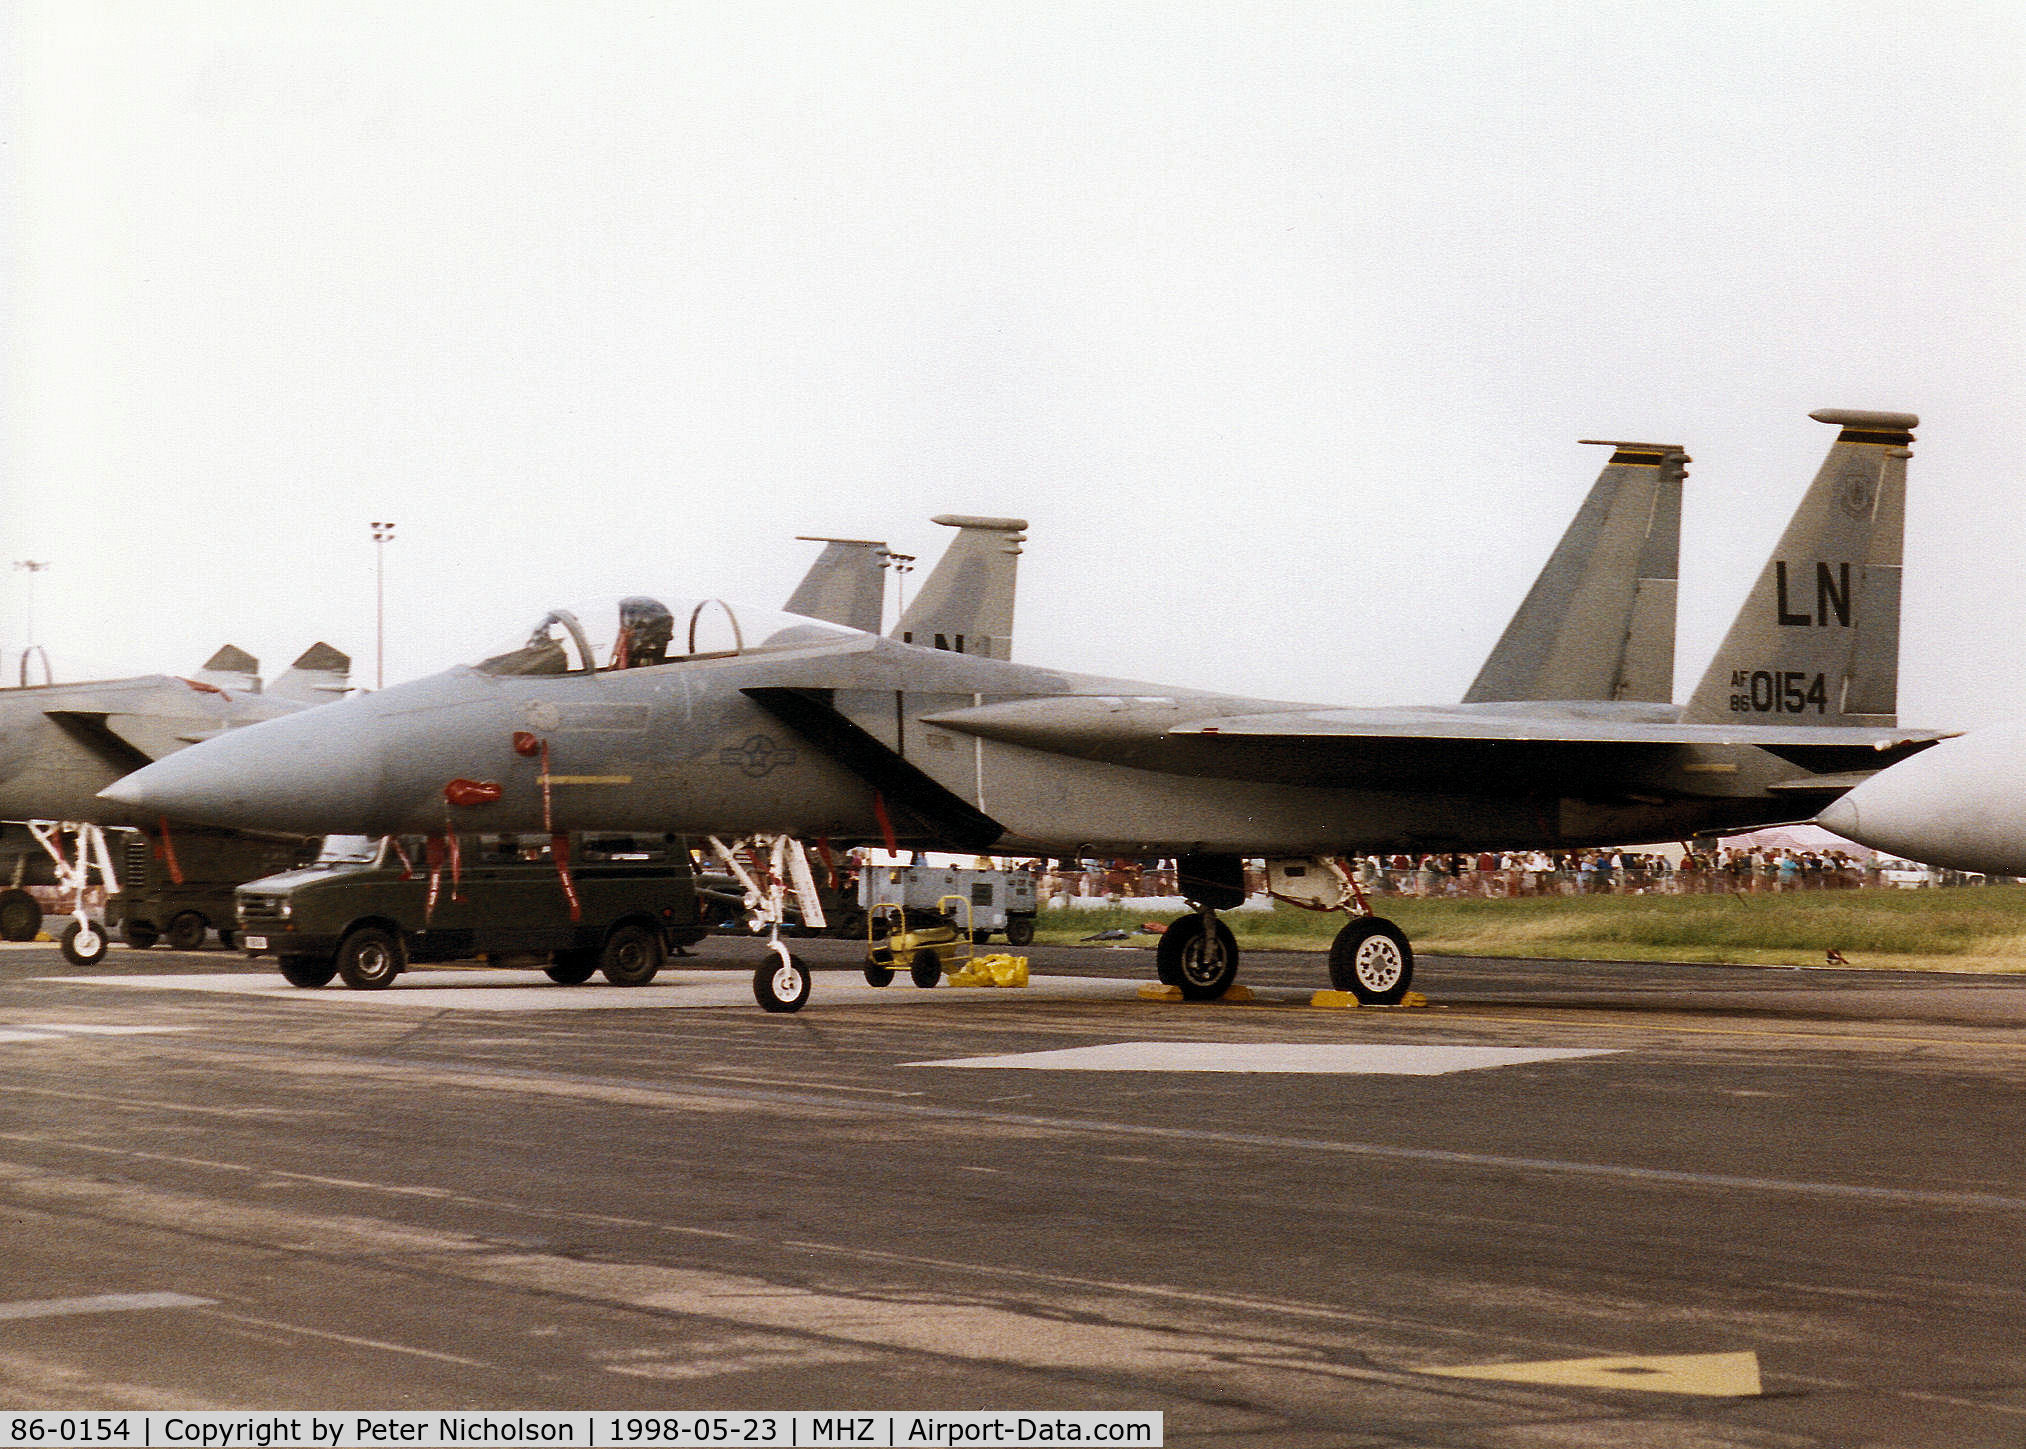 86-0154, 1986 McDonnell Douglas F-15C Eagle C/N 1001/C382, F-15C Eagle of 493rd Fighter Squadron/48th Fighter Wing at RAF Lakenheath on static display at the 1998 RAF Mildenhall Air Fete.